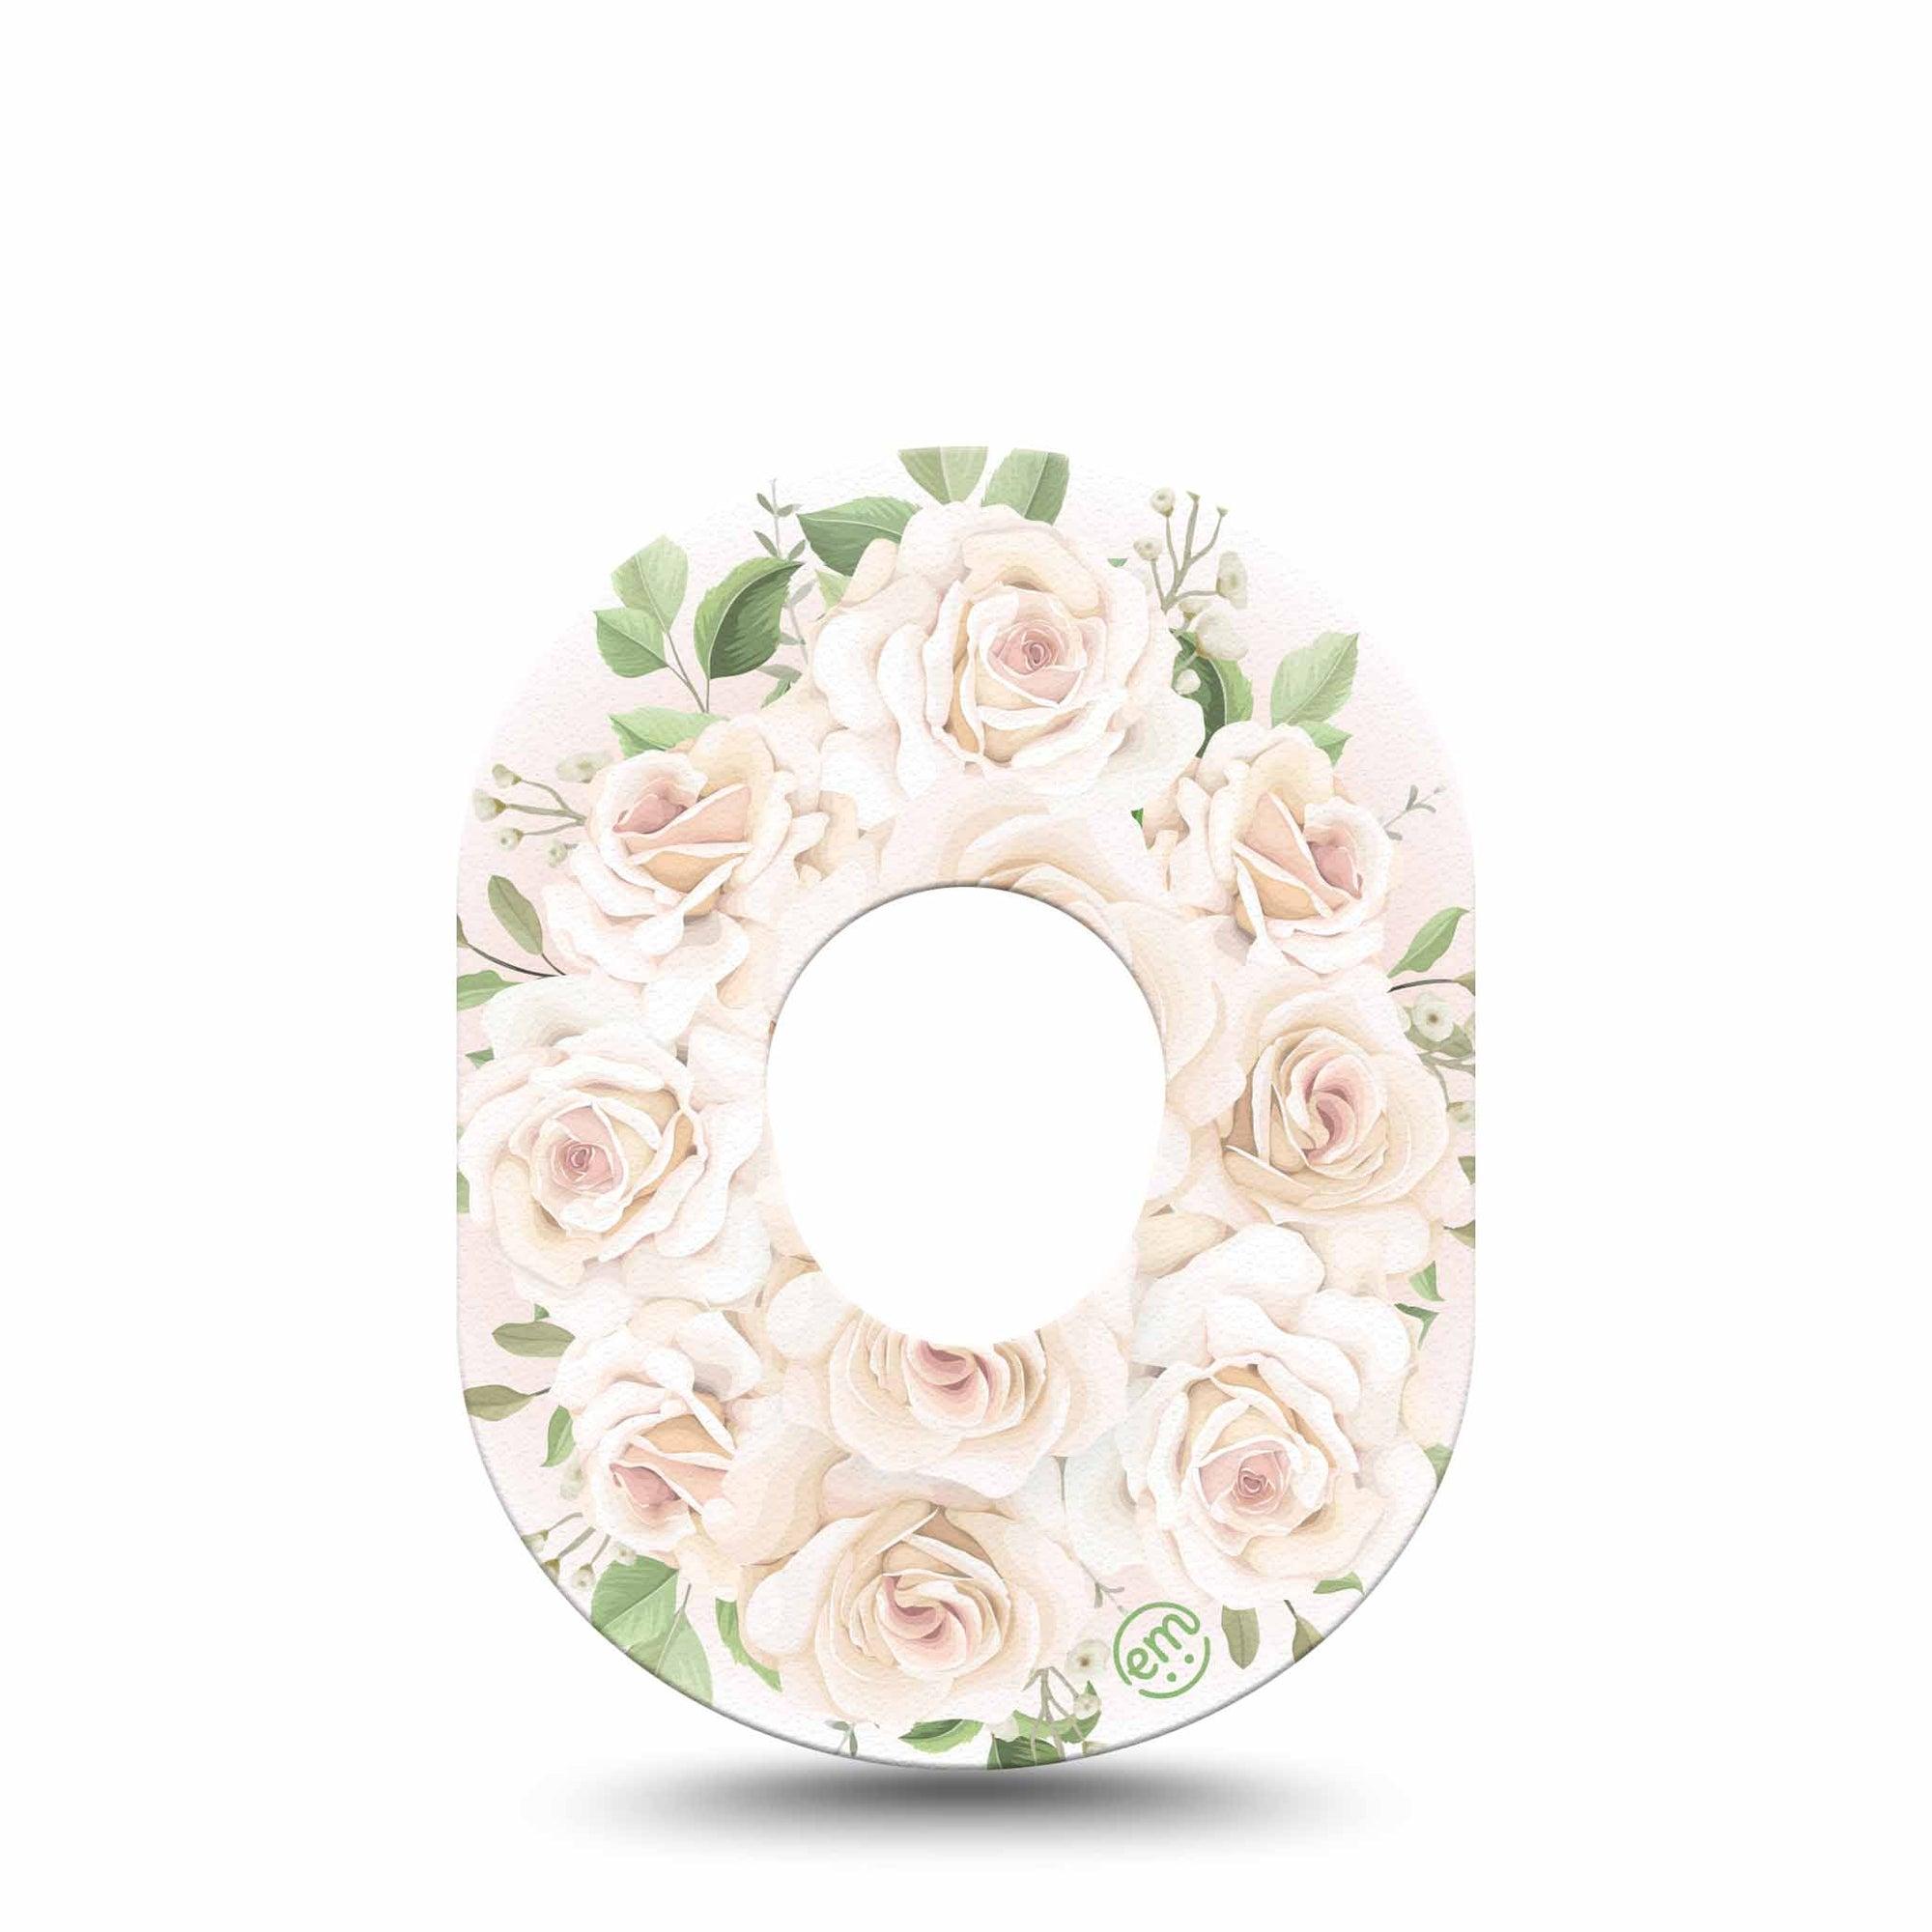 ExpressionMed Wedding Bouquet Dexcom G7 Tape, Single, Floral Arrangement Inspired, CGM Overlay Patch Design